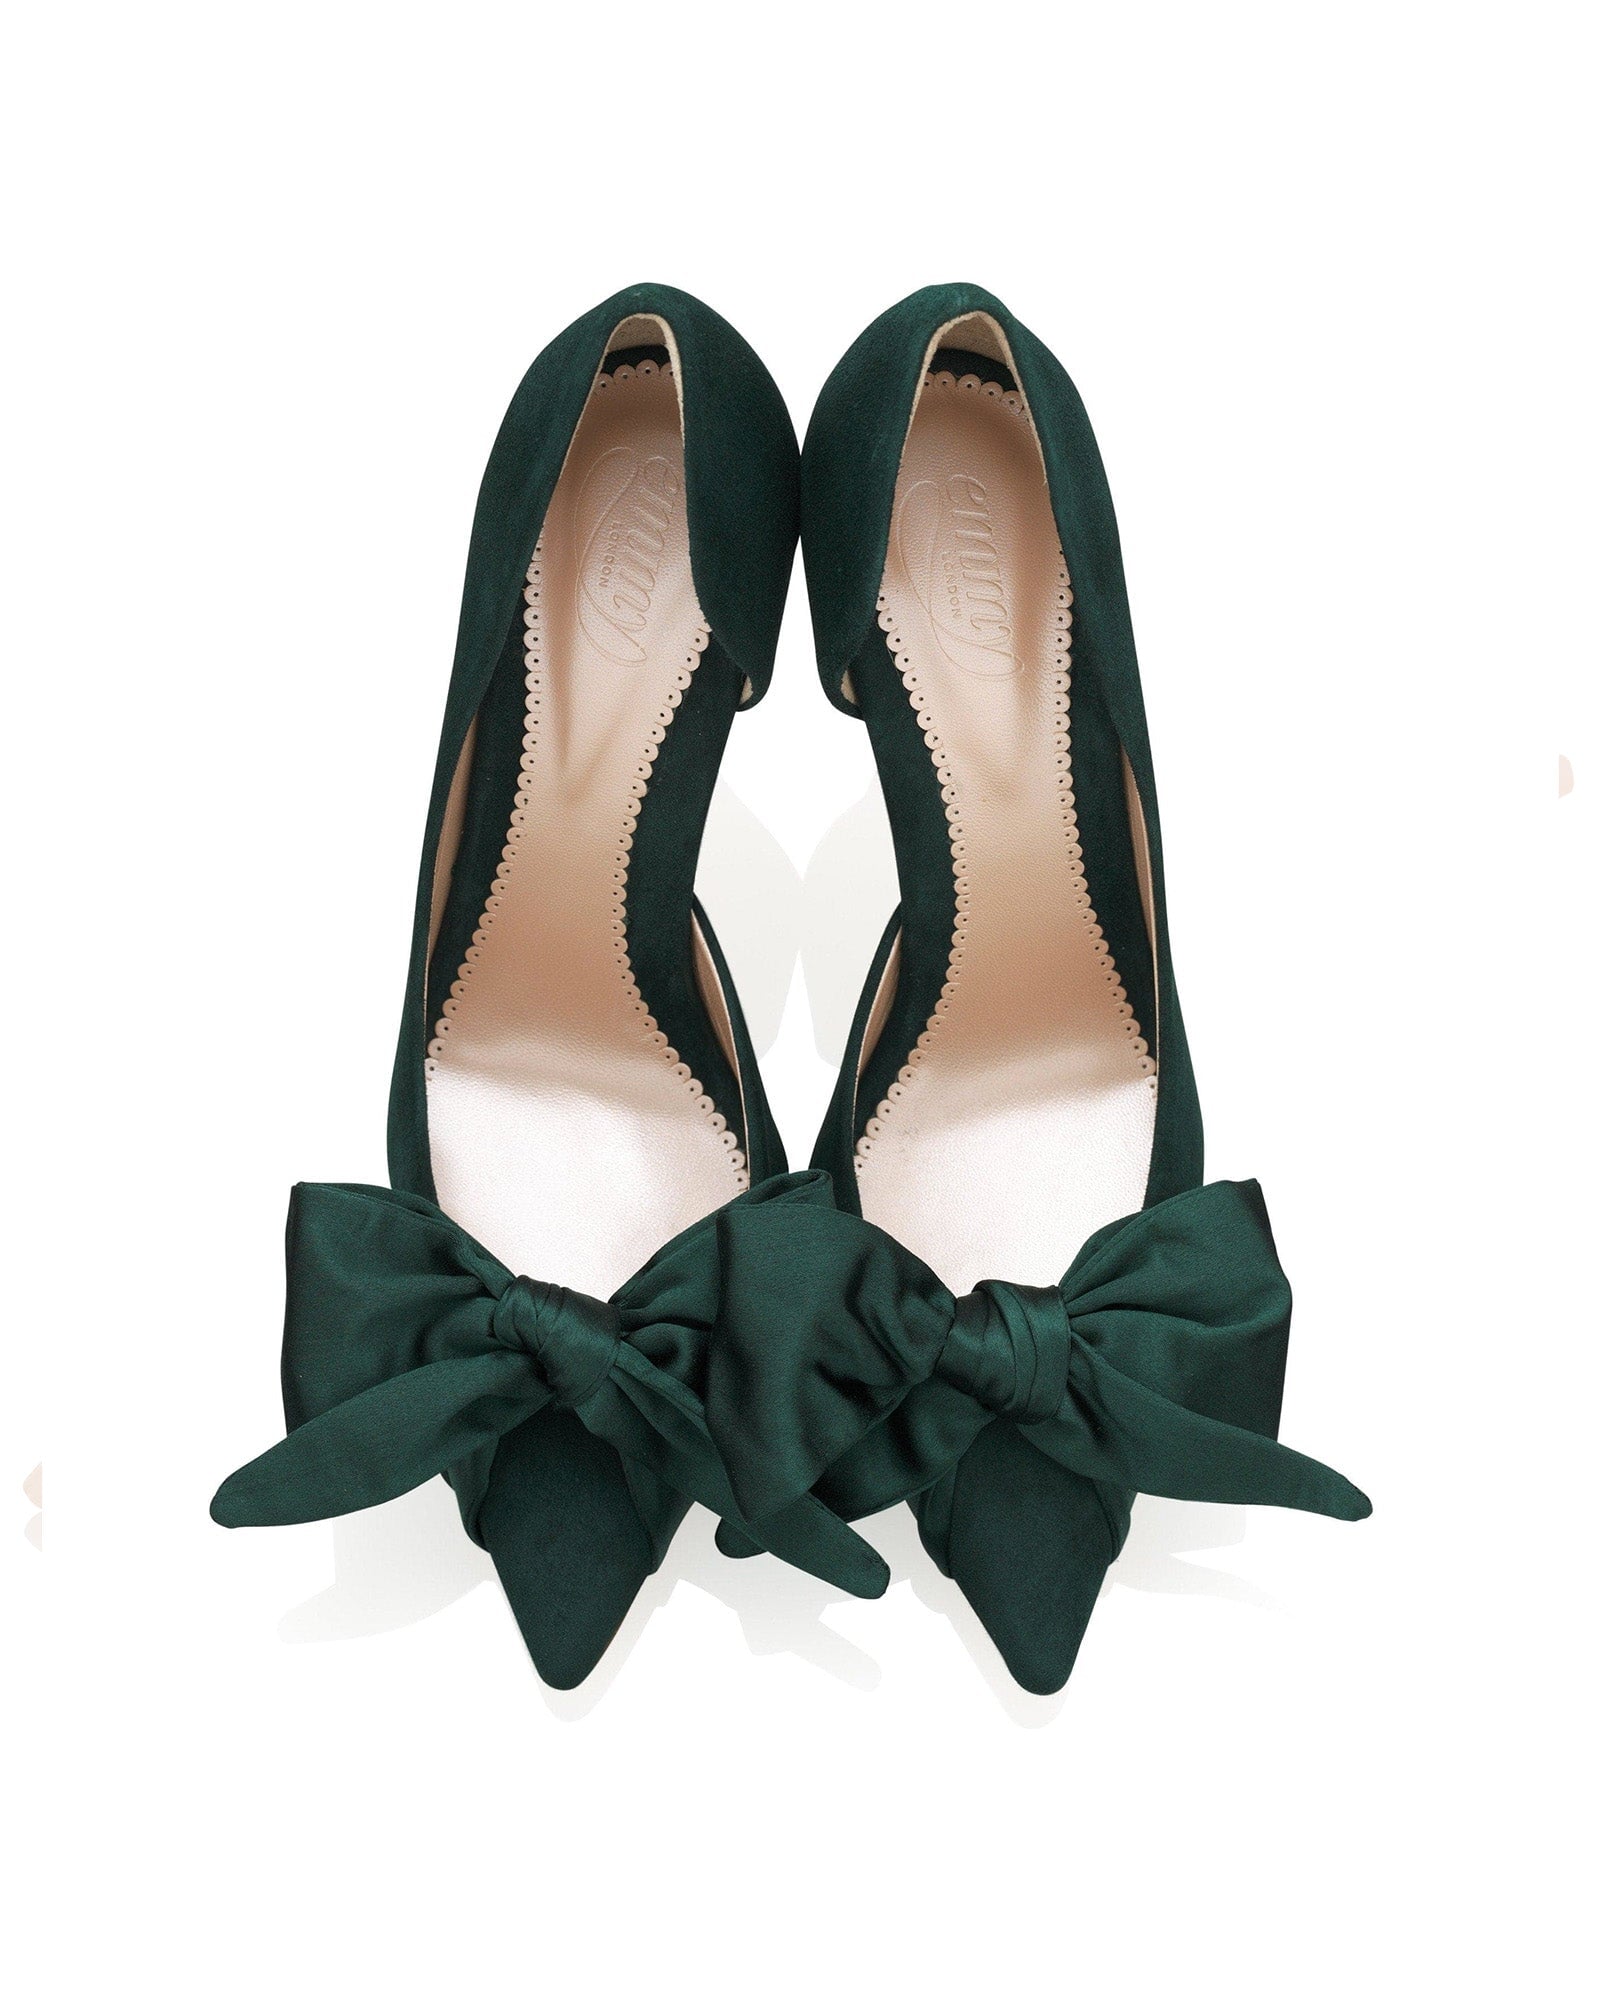 Florence Greenery Mid Fashion Shoe Green Suede Court Shoe with Satin Bow  image